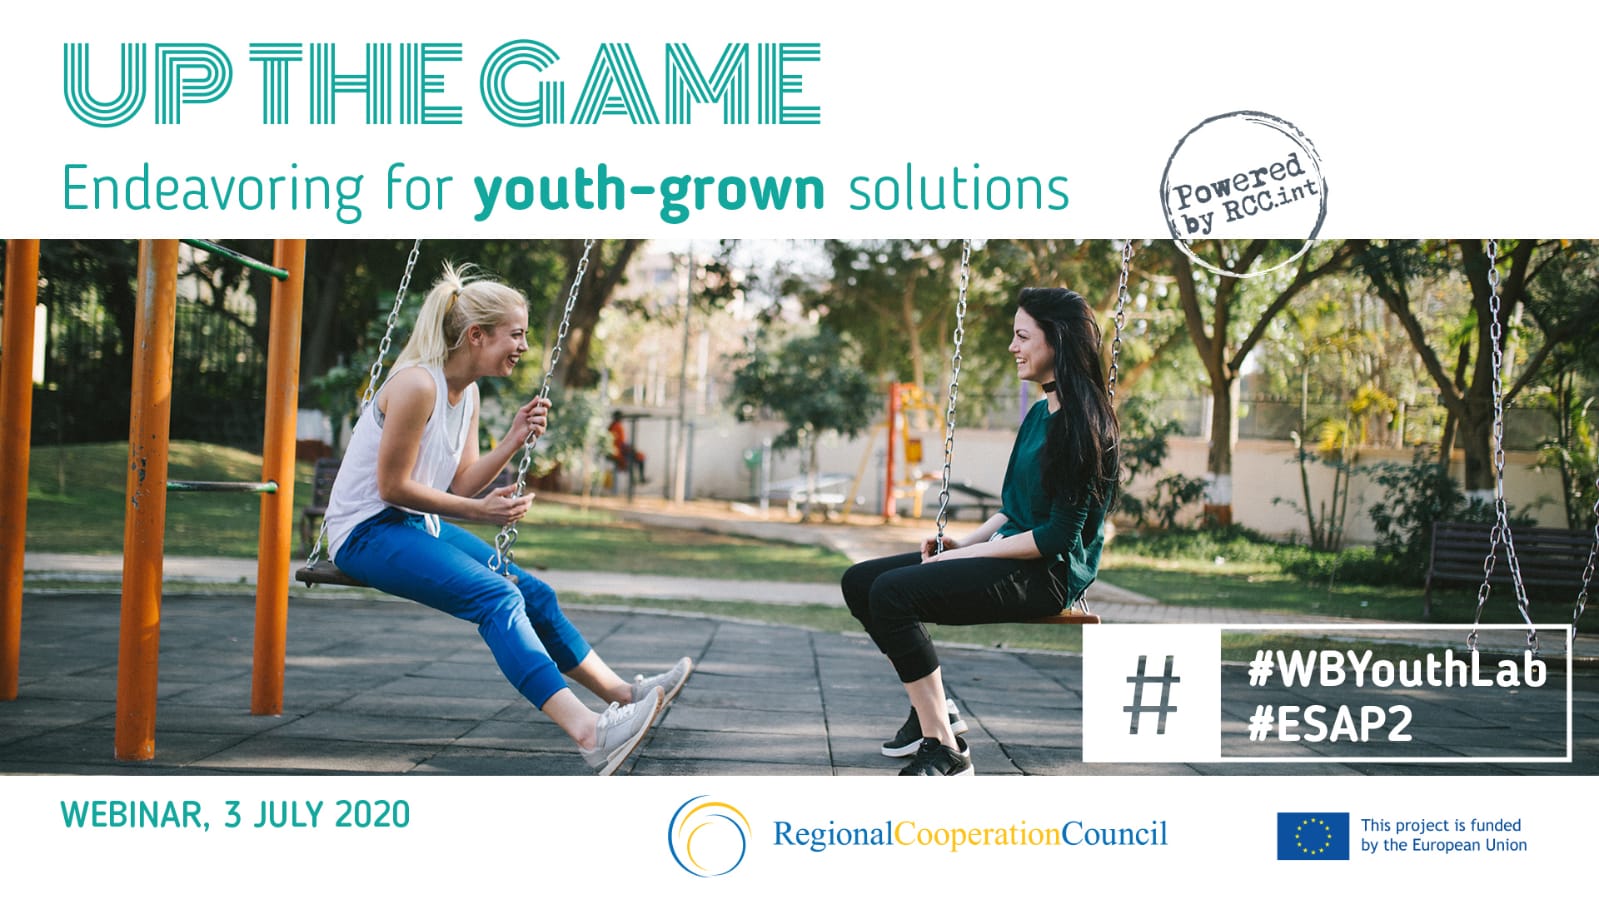 RCC’s Western Balkans Youth Lab and Employment and Social Affairs Platform Projects organized webinar tackling youth unemployment in the region on 3 July 2020 (Photo: RCC/ESAP2)